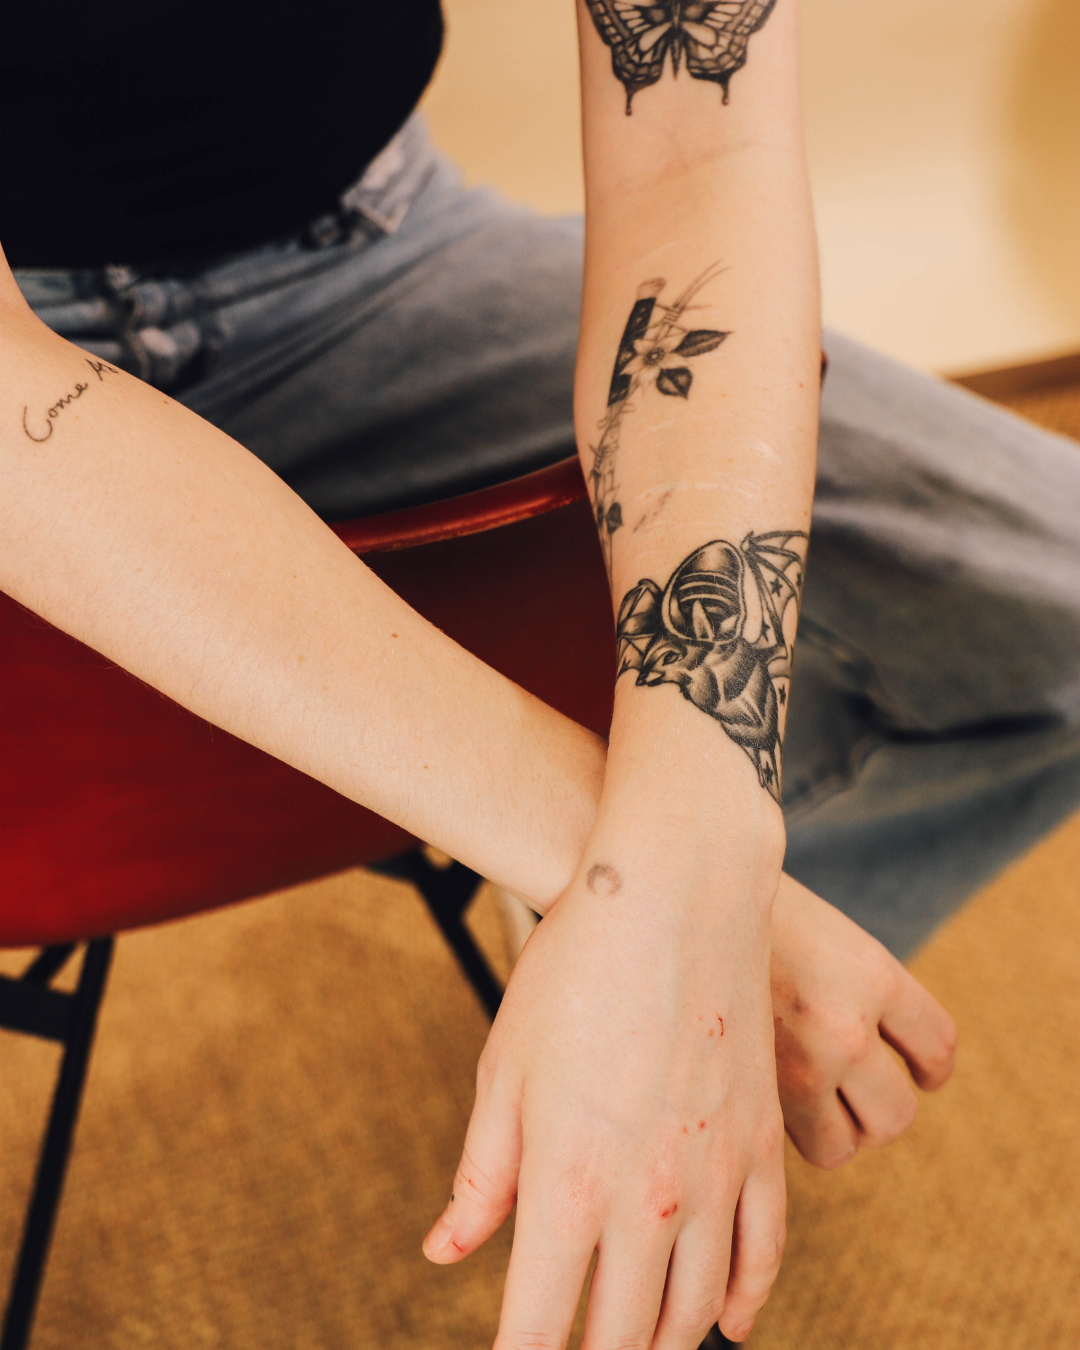 Ink positive: how tattoos can heal the mind as well as adorn the body |  Psychology | The Guardian